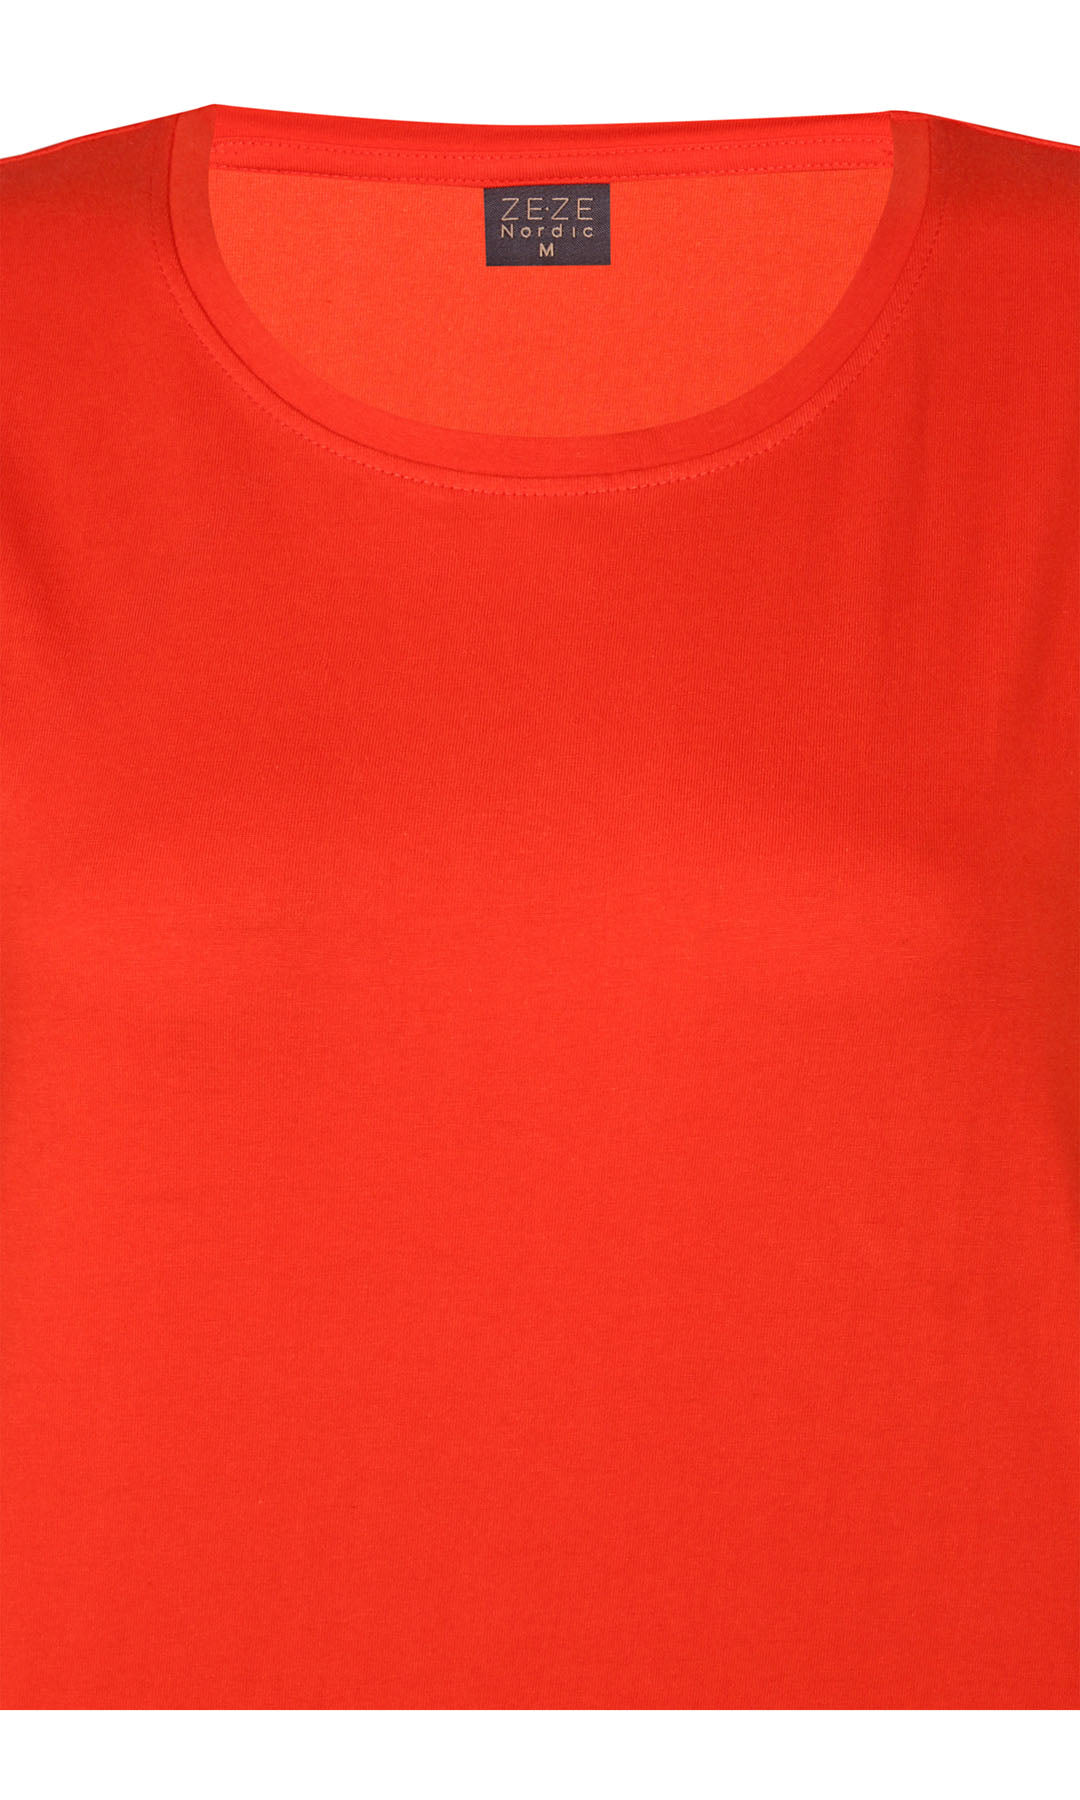 Came 981 - T-shirt - Poinciana red